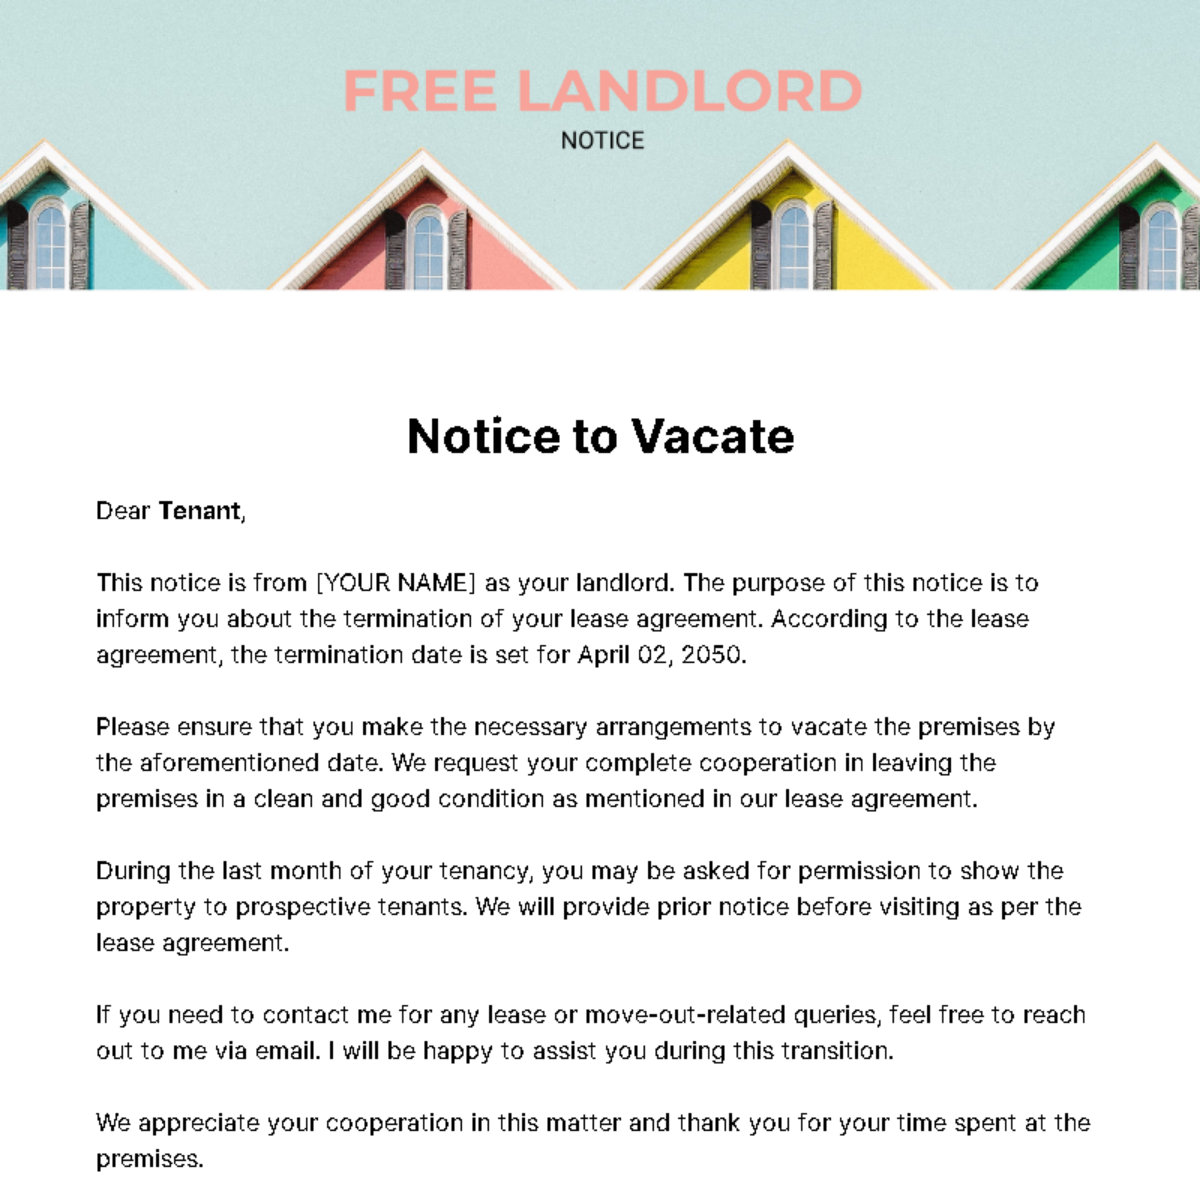 Free Landlord Notice Template